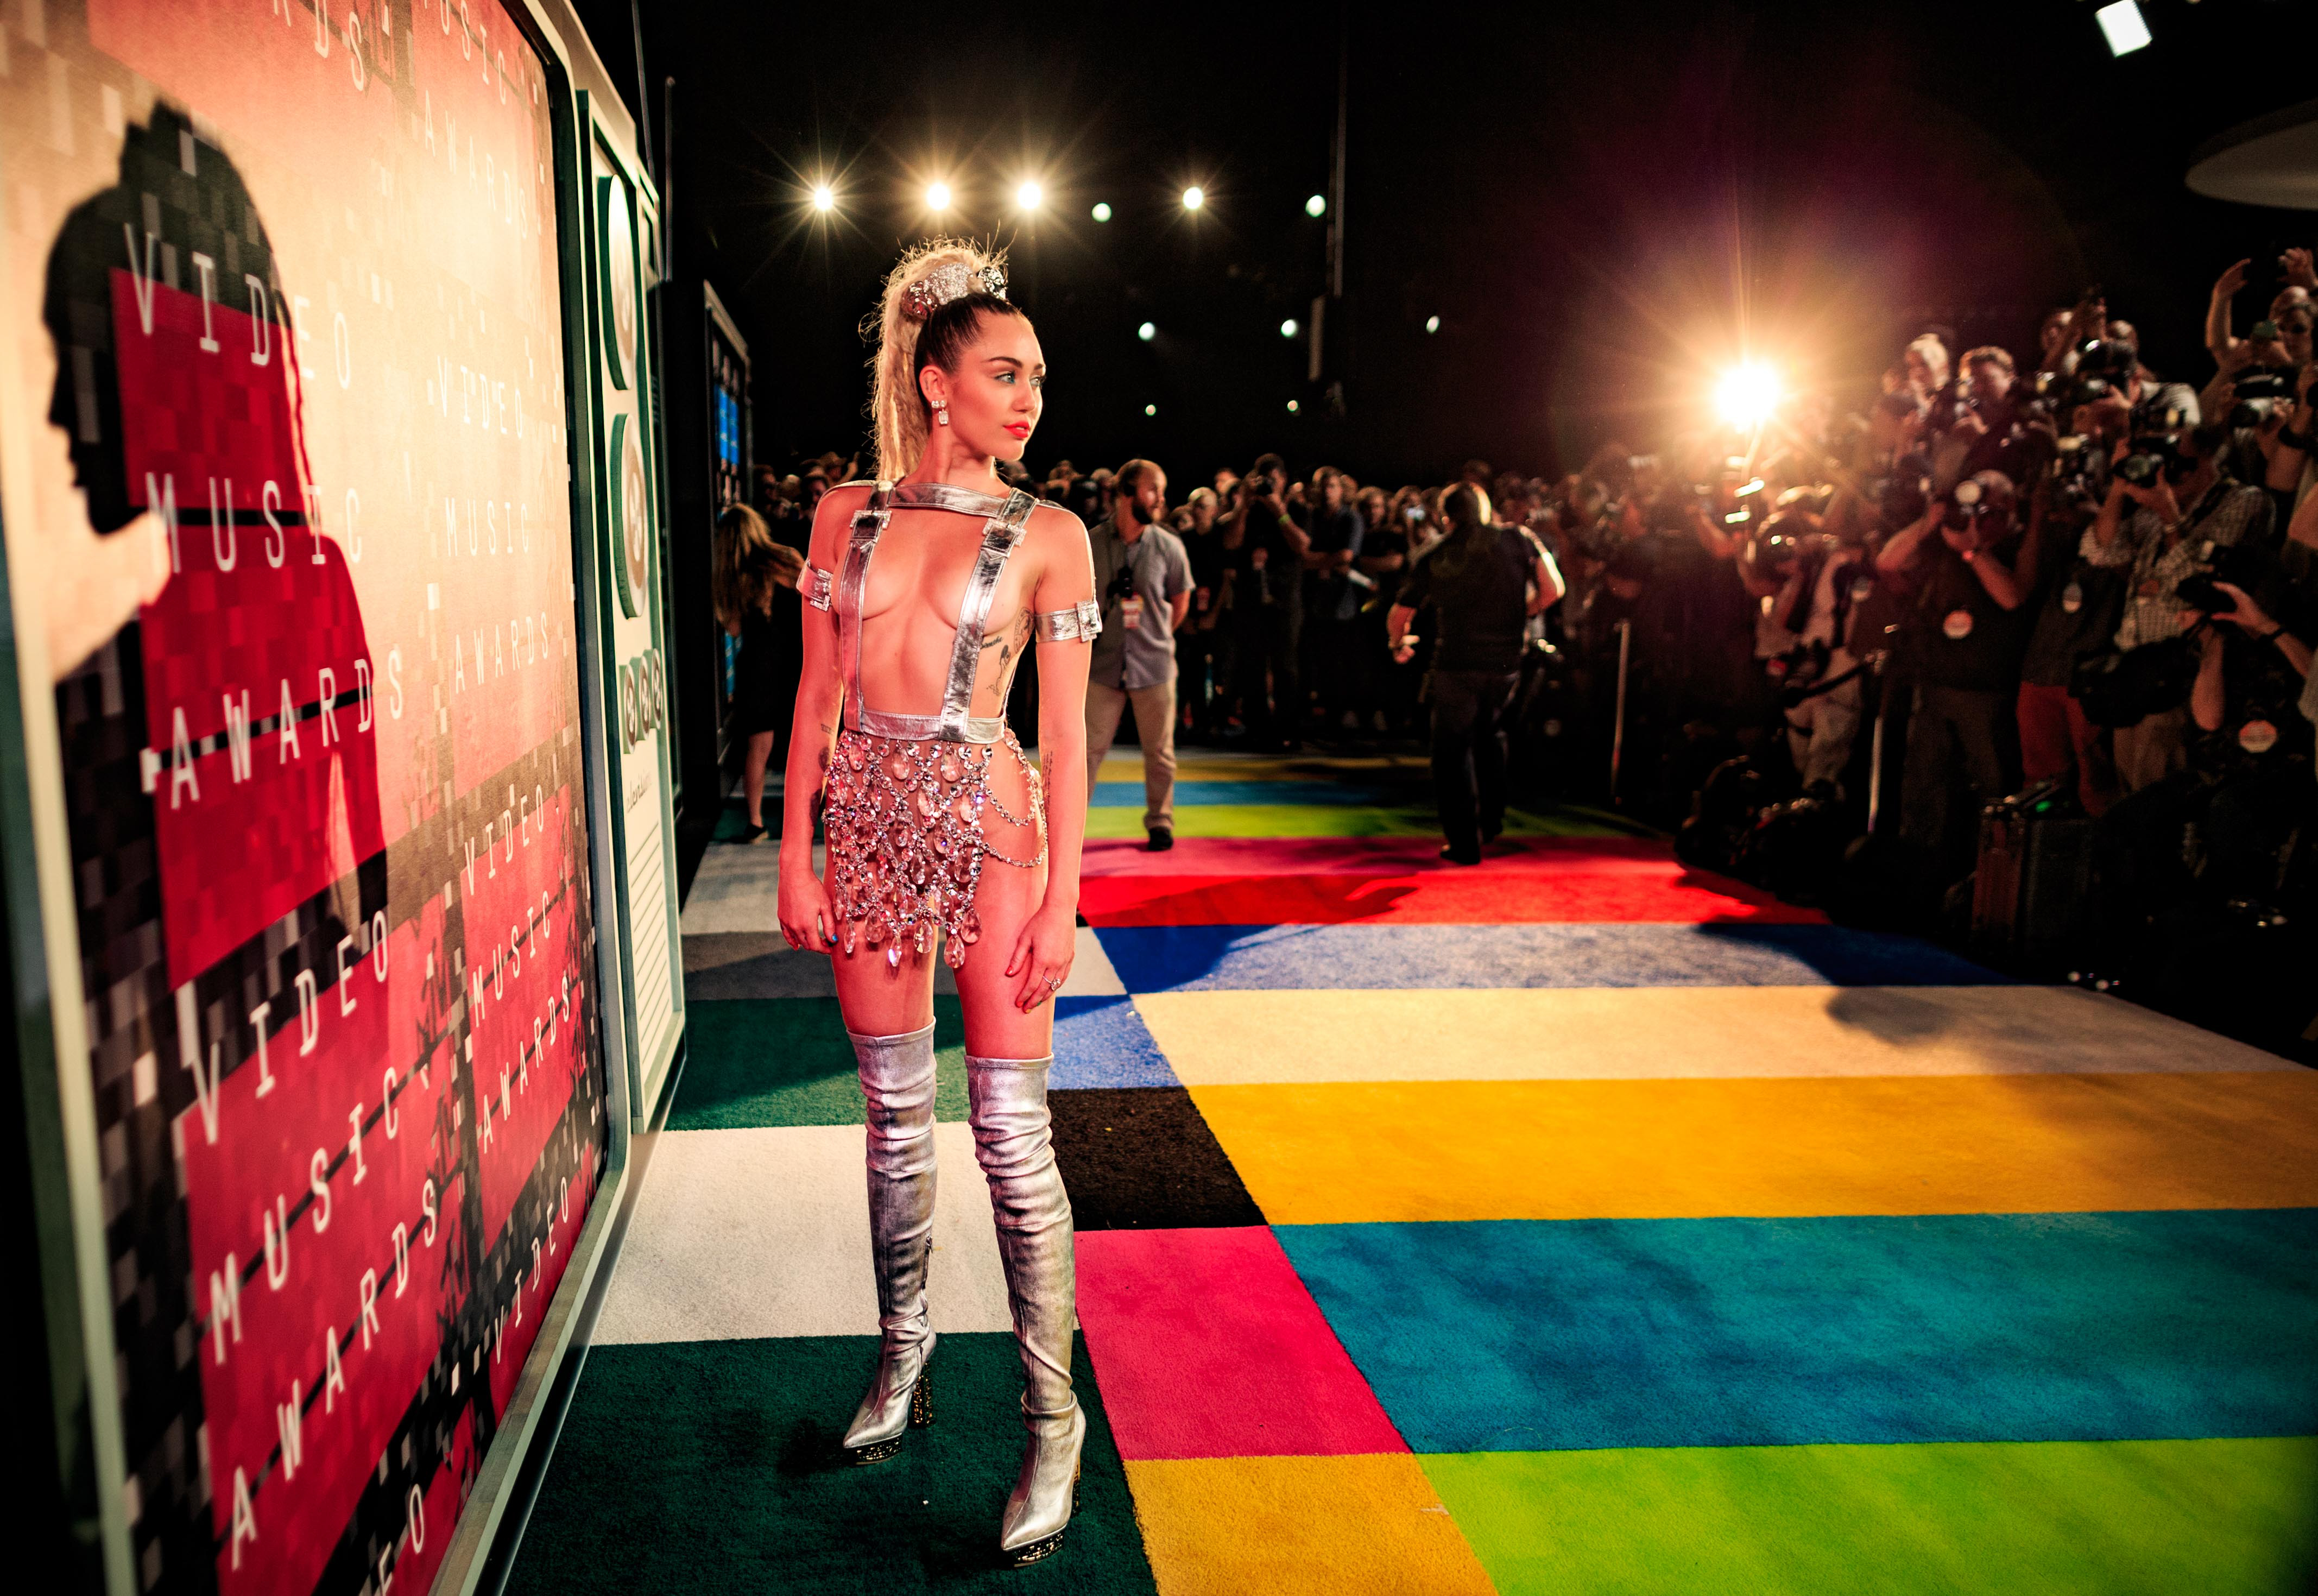 Miley Cyrus at the 2015 MTV Video Music Awards - Red Carpet